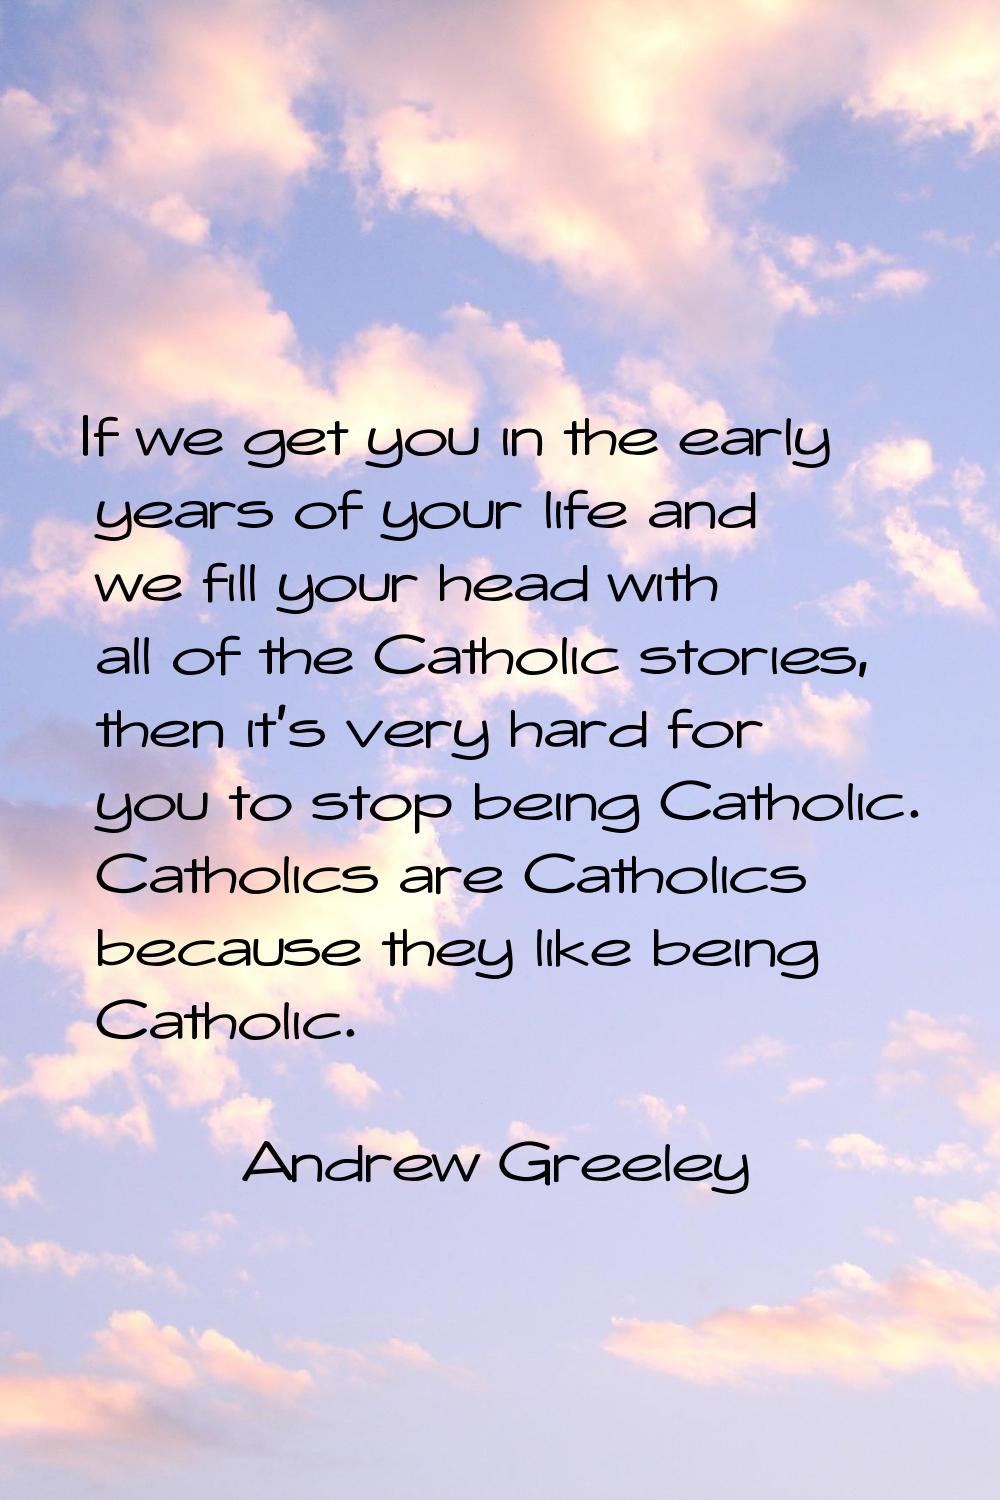 If we get you in the early years of your life and we fill your head with all of the Catholic storie